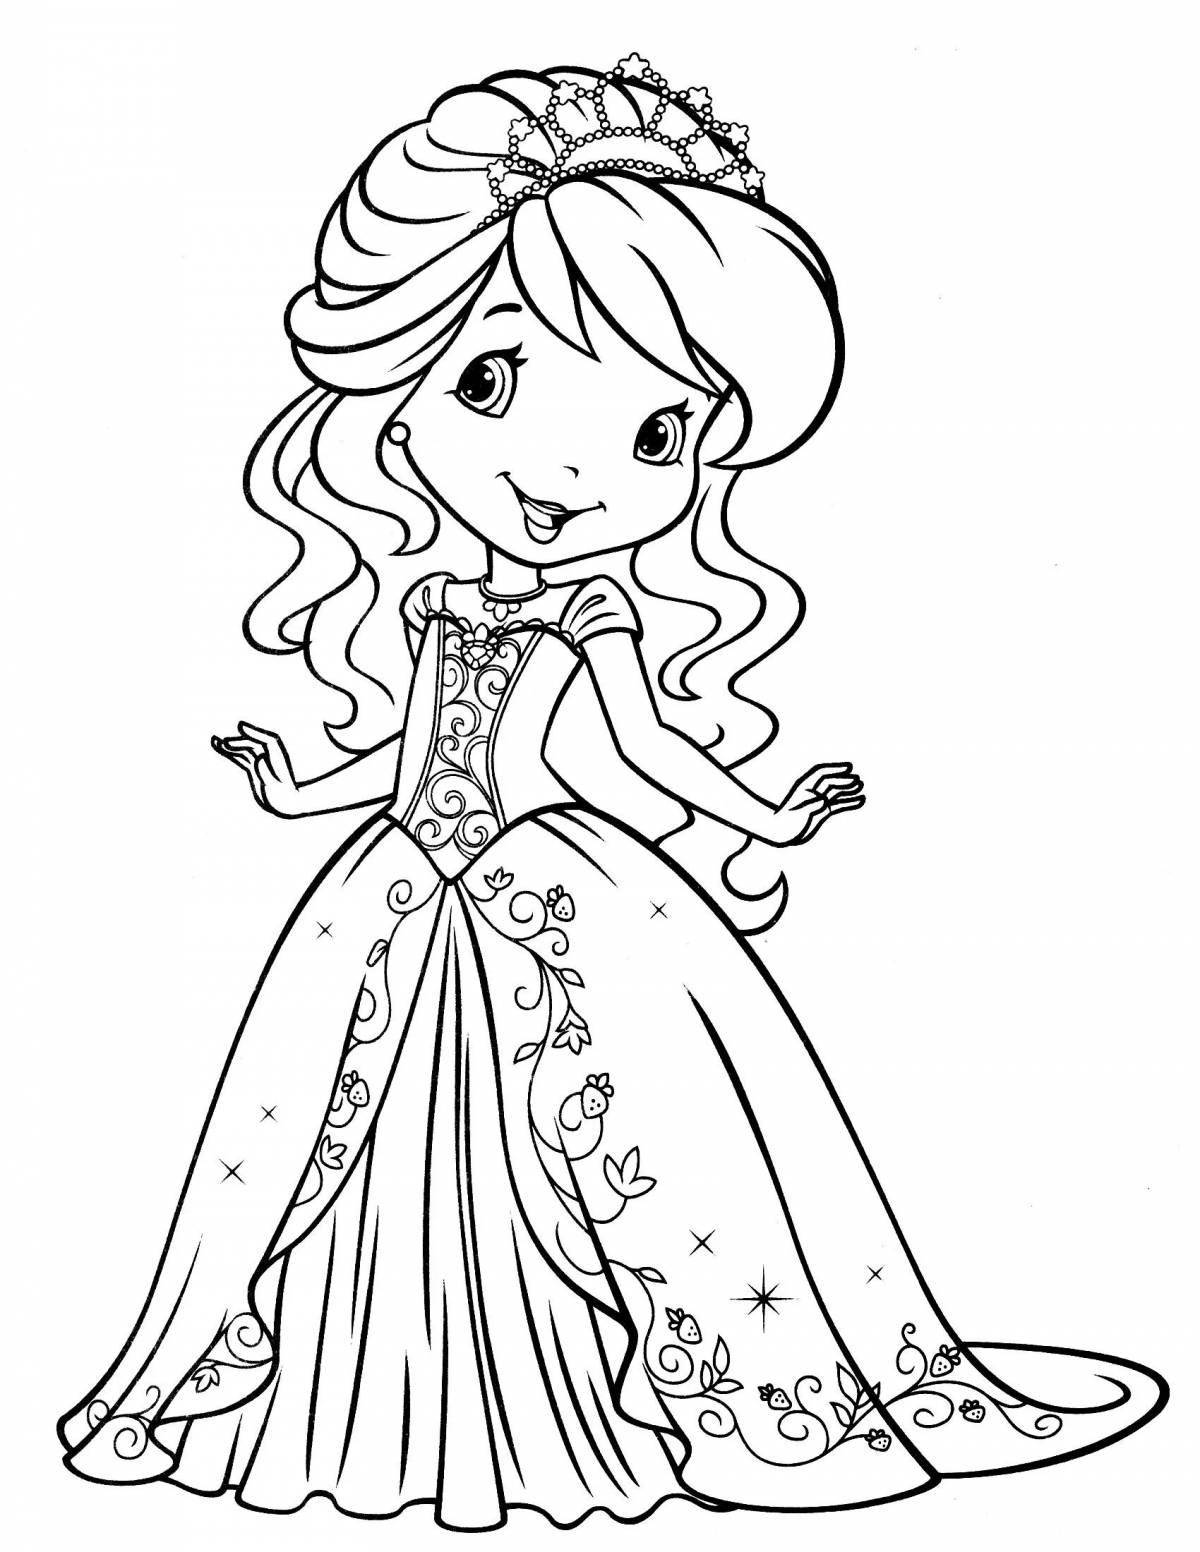 Cute coloring book for girls pdf